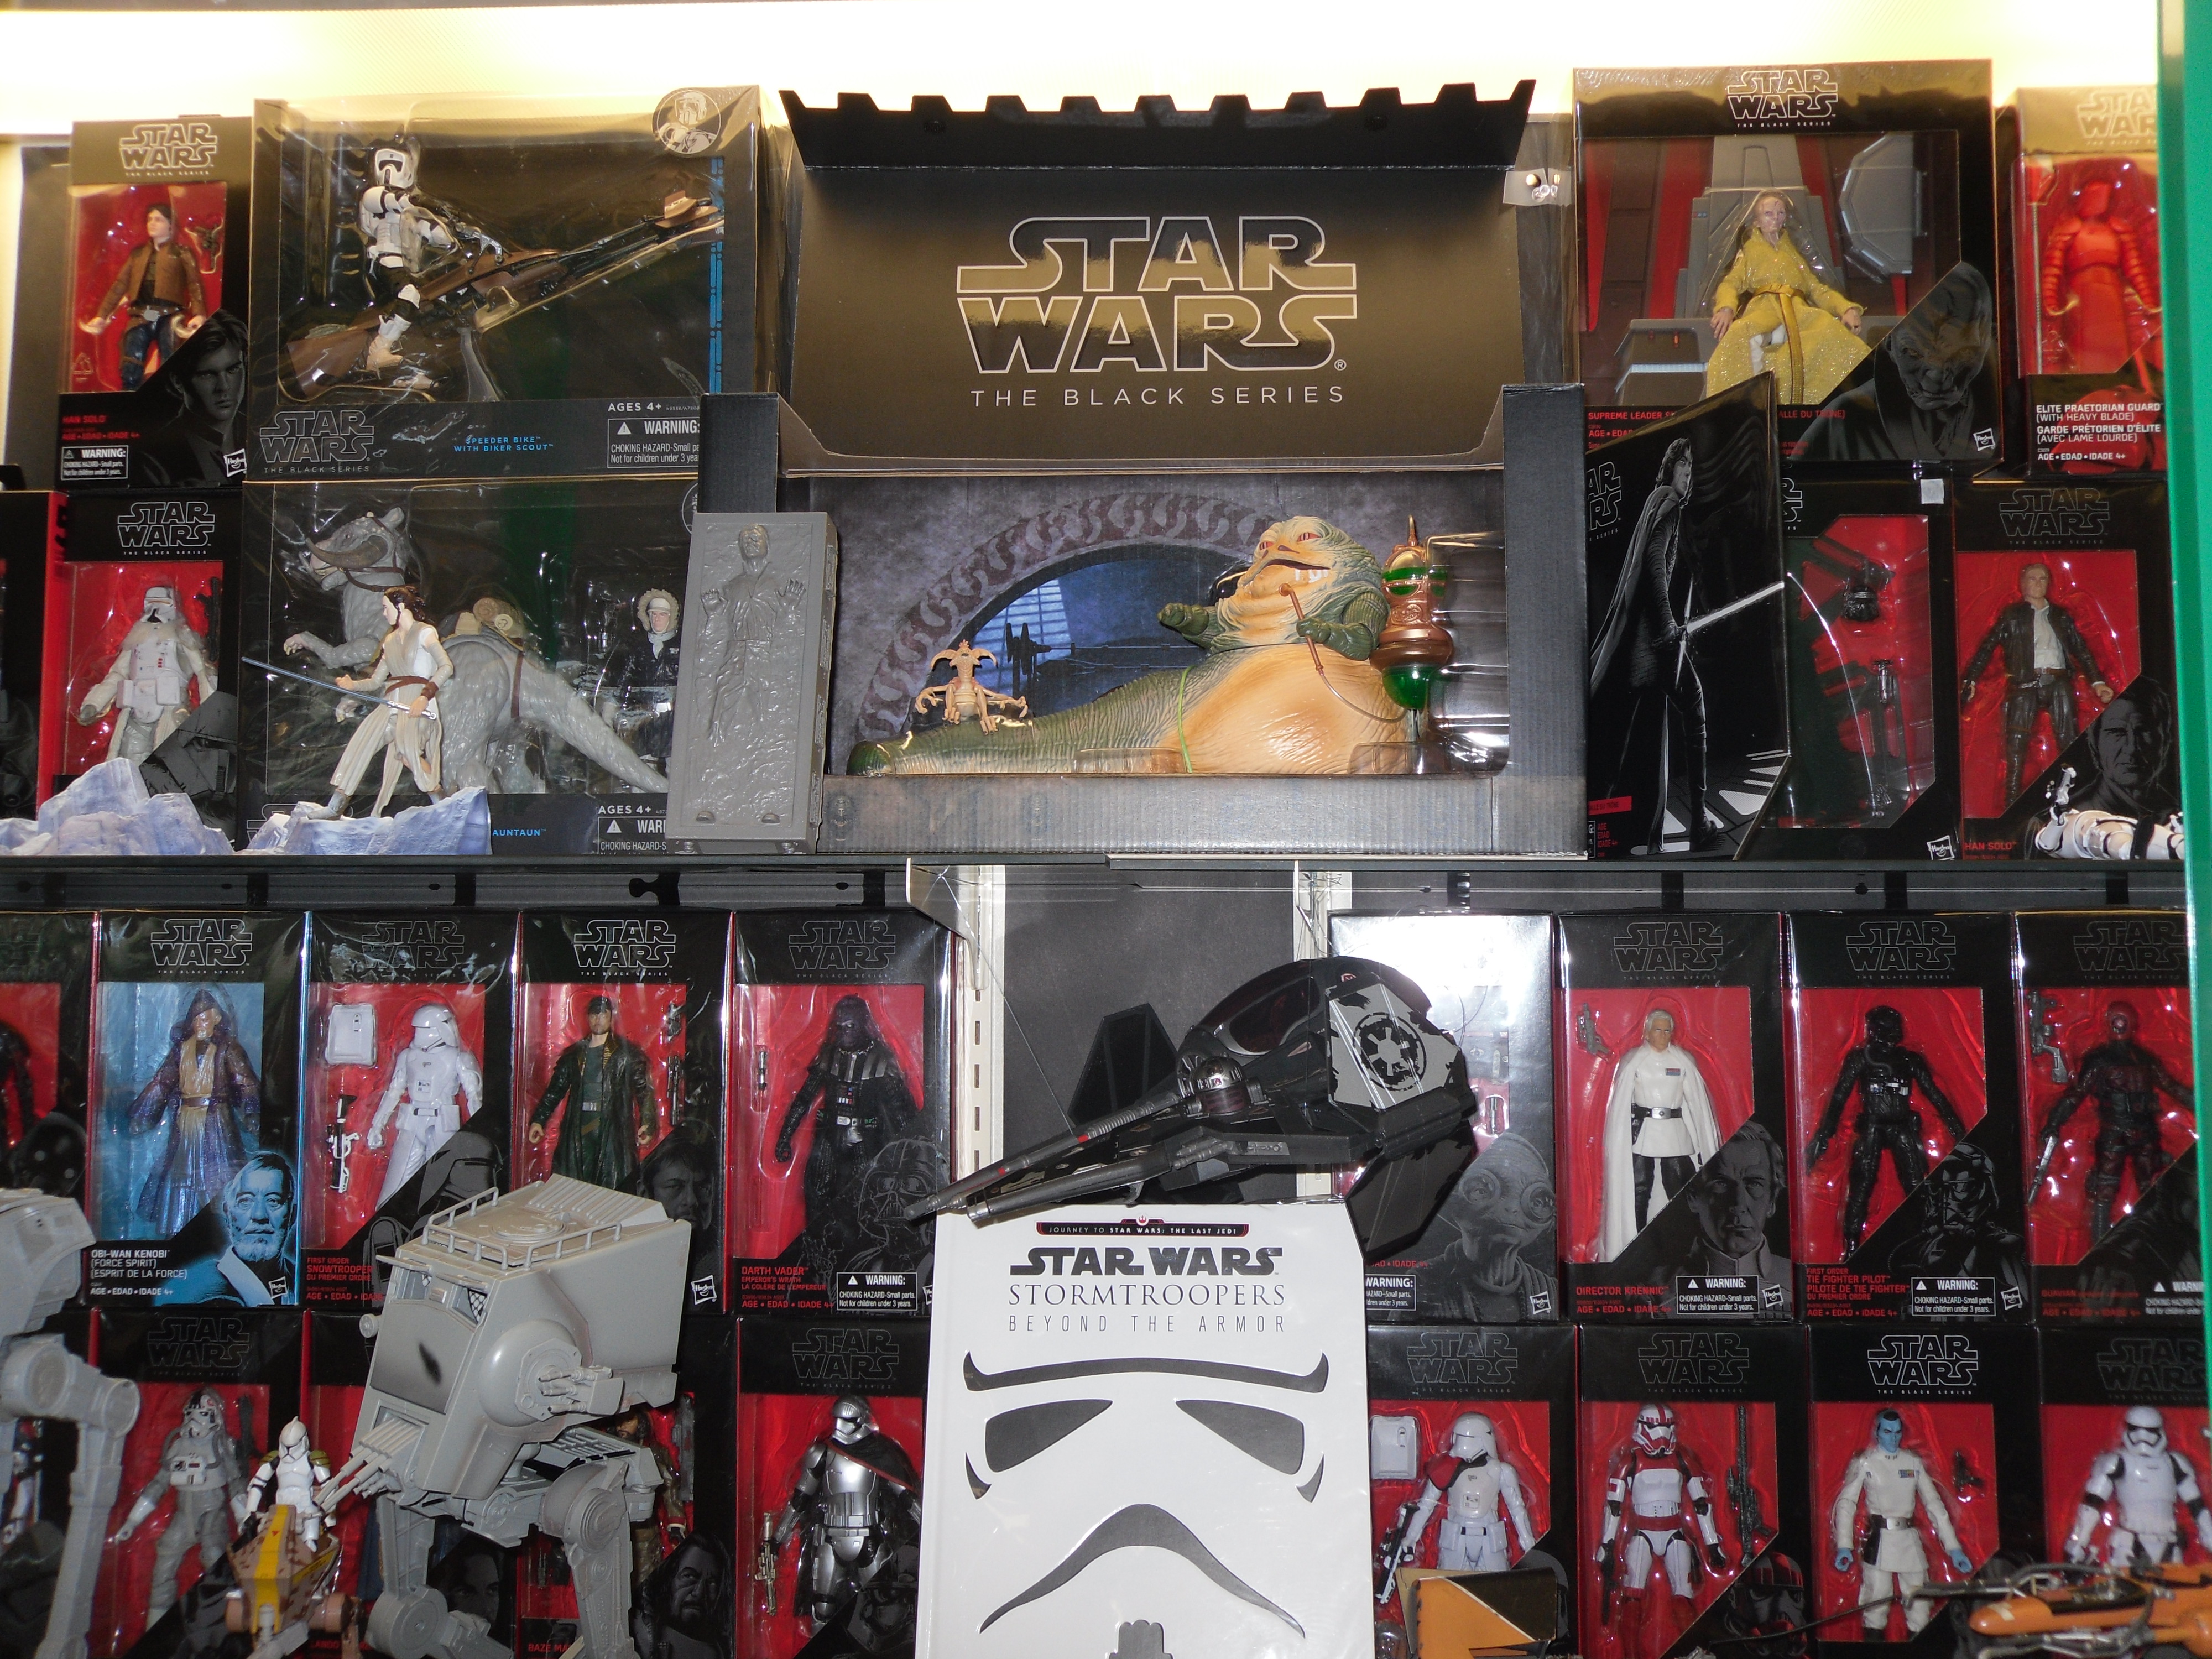 Star Wars figurine and book display at Kapolei Public Library during May 2018